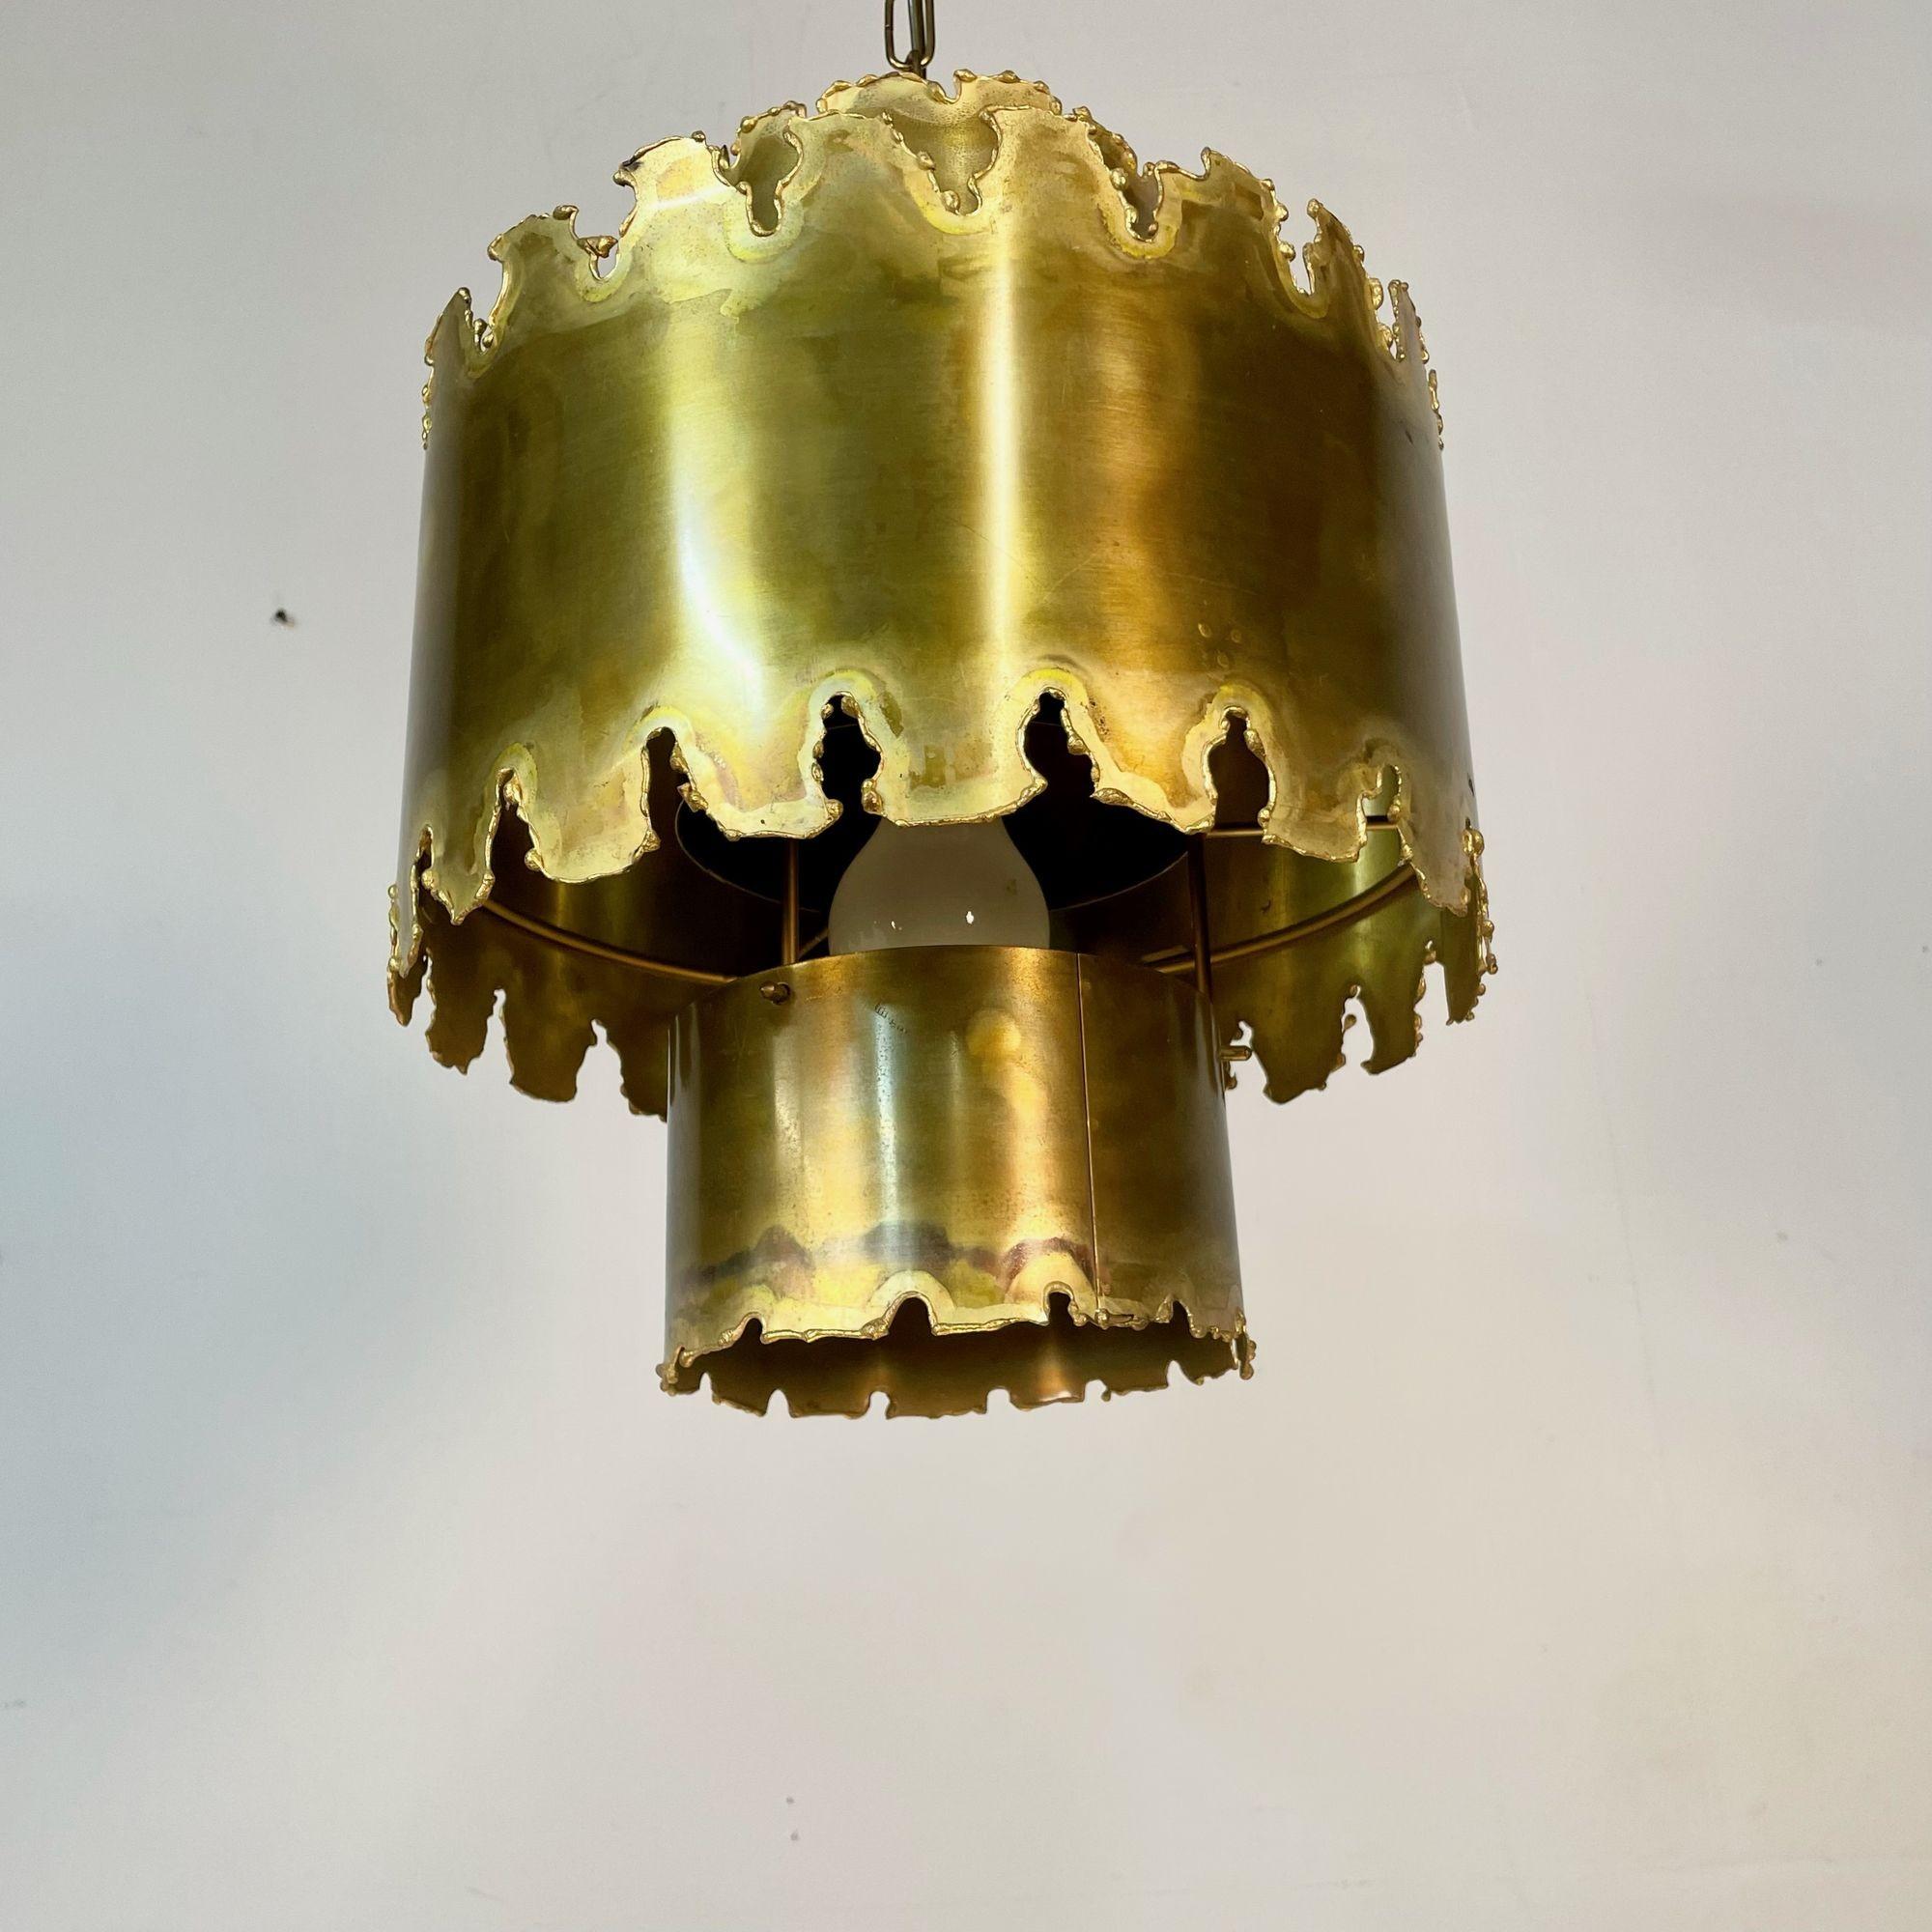 Mid-20th Century Mid-Century Modern Brutalist Chandelier / Pendant by Tom Greene, Patinated Brass For Sale